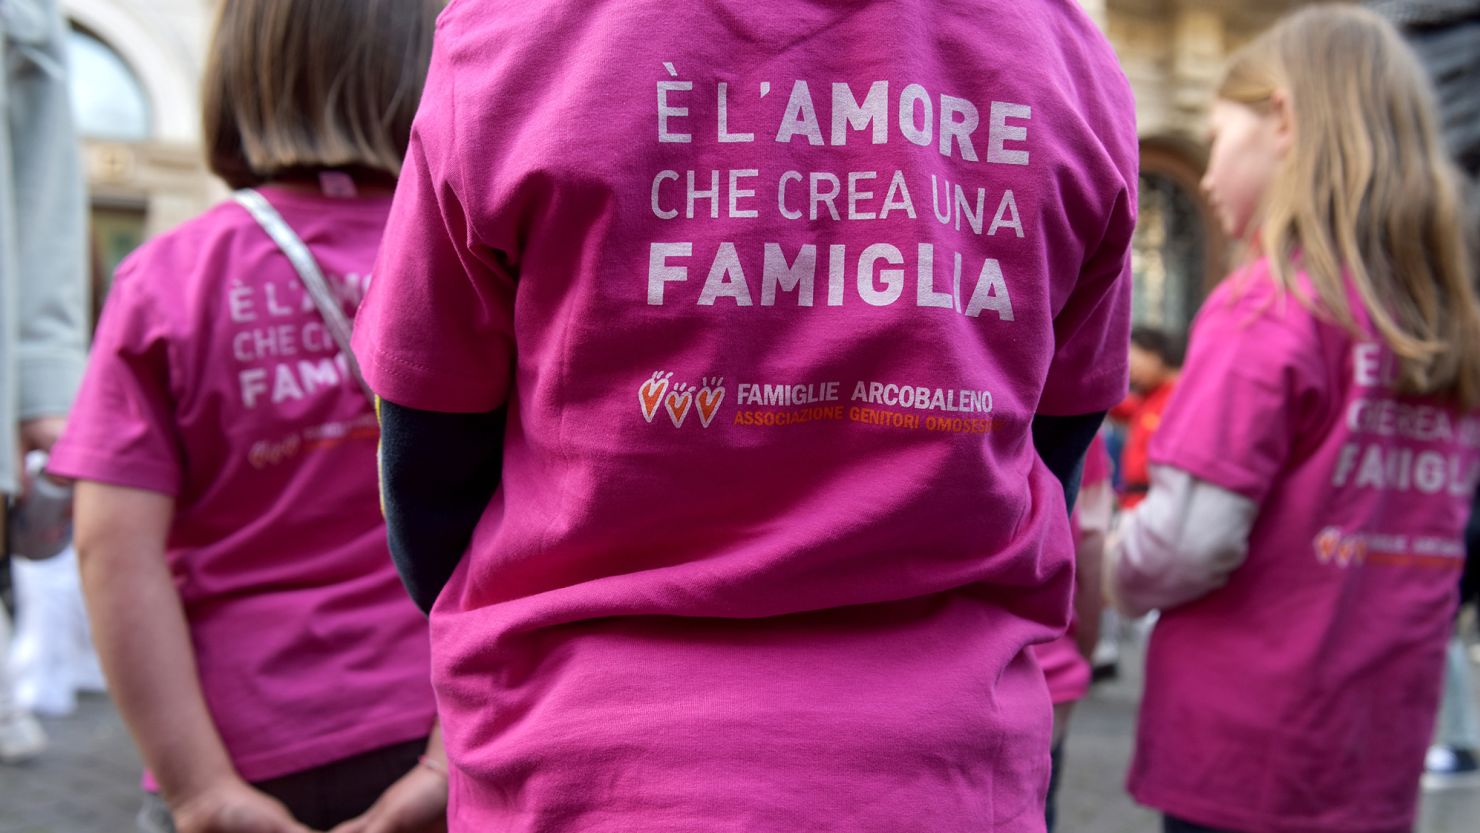 Supporters of the Italian LGBT organization Rainbow Families Association protesting in Rome in March.